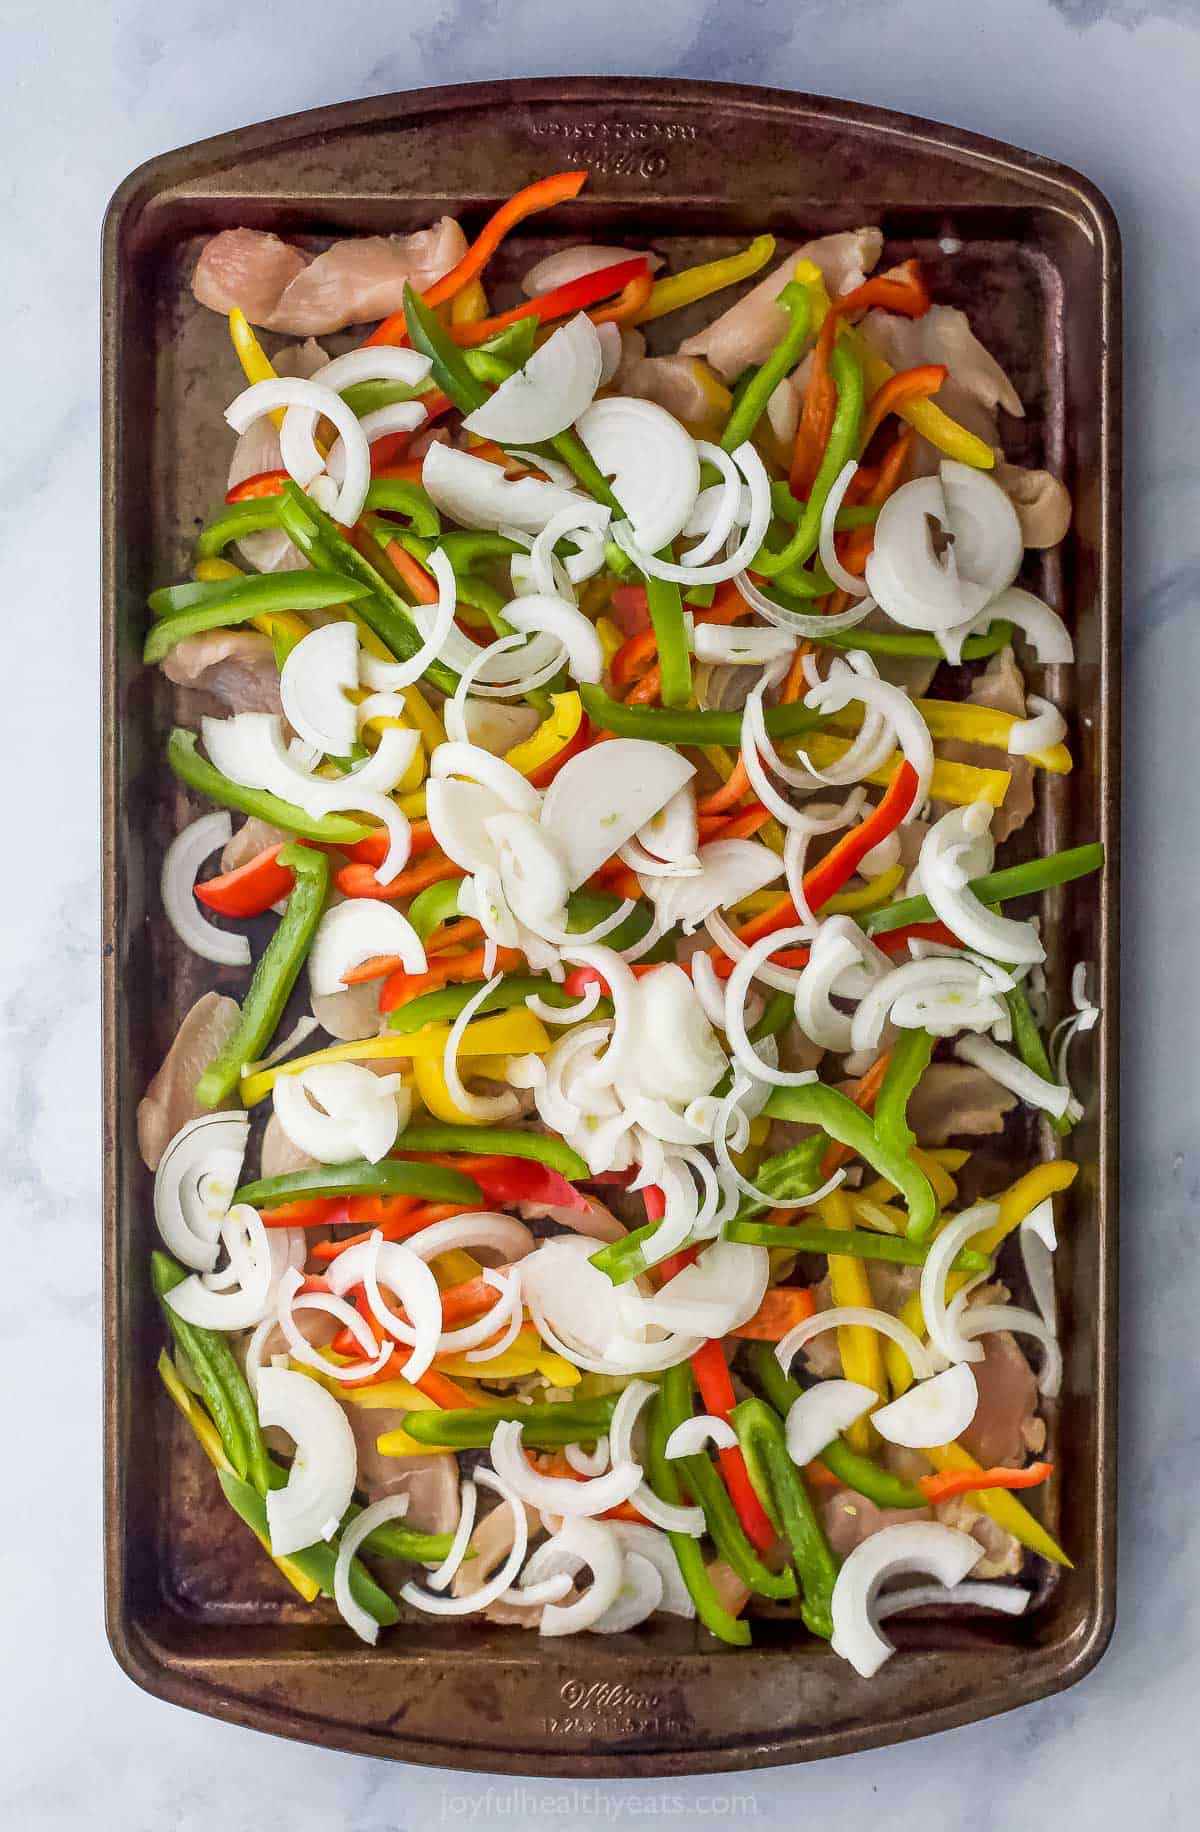 Onions on top of peppers on topped of chicken breast slices on a baking sheet